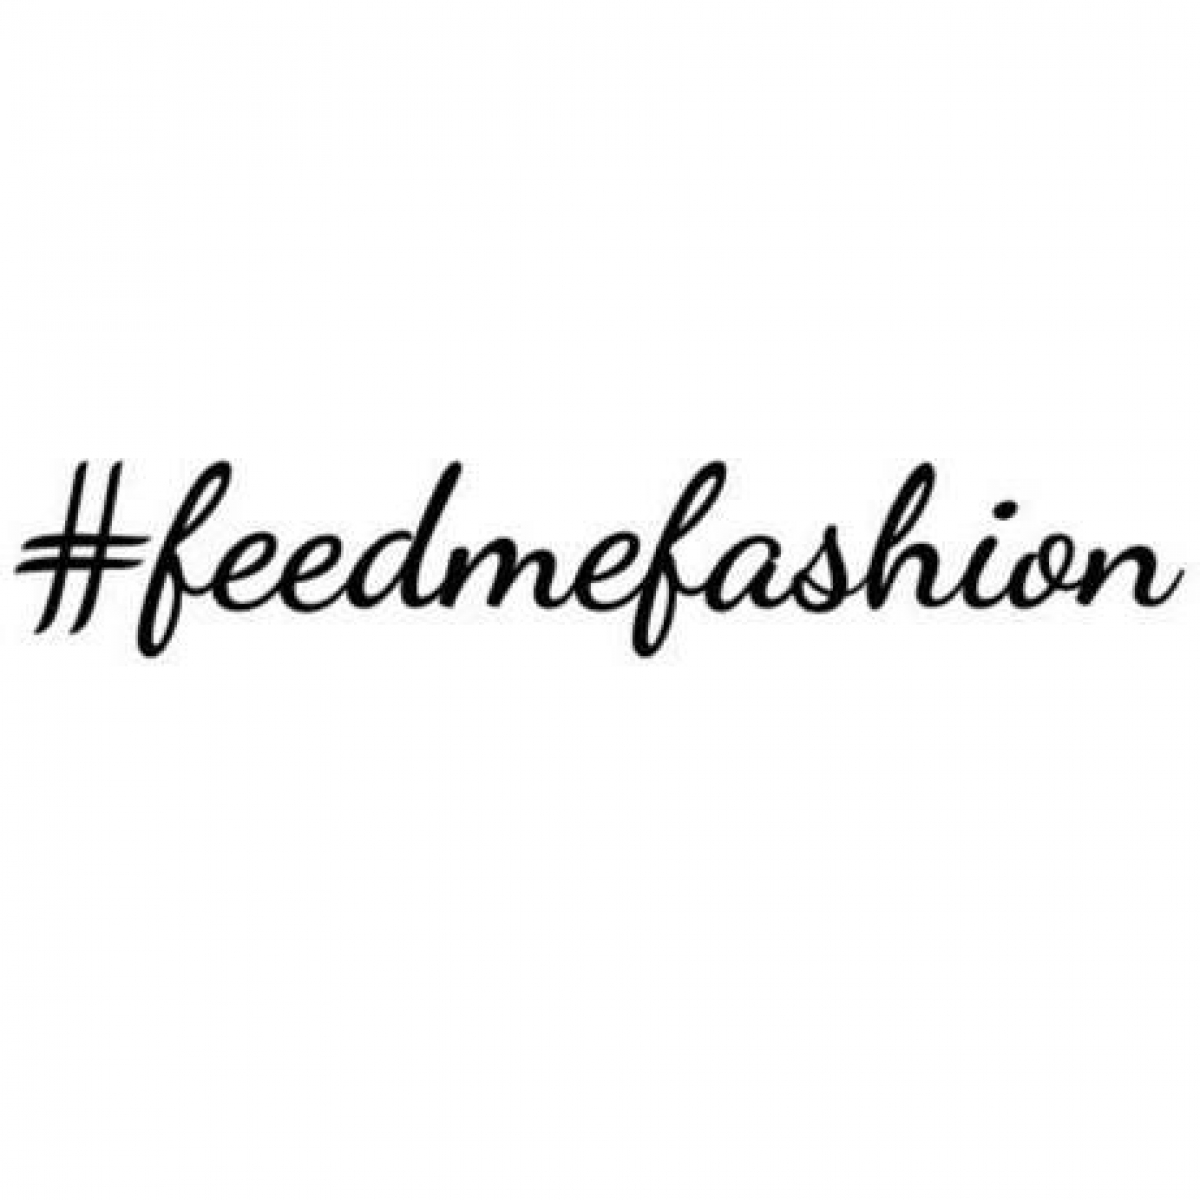 Feedme.fashion is almost back!